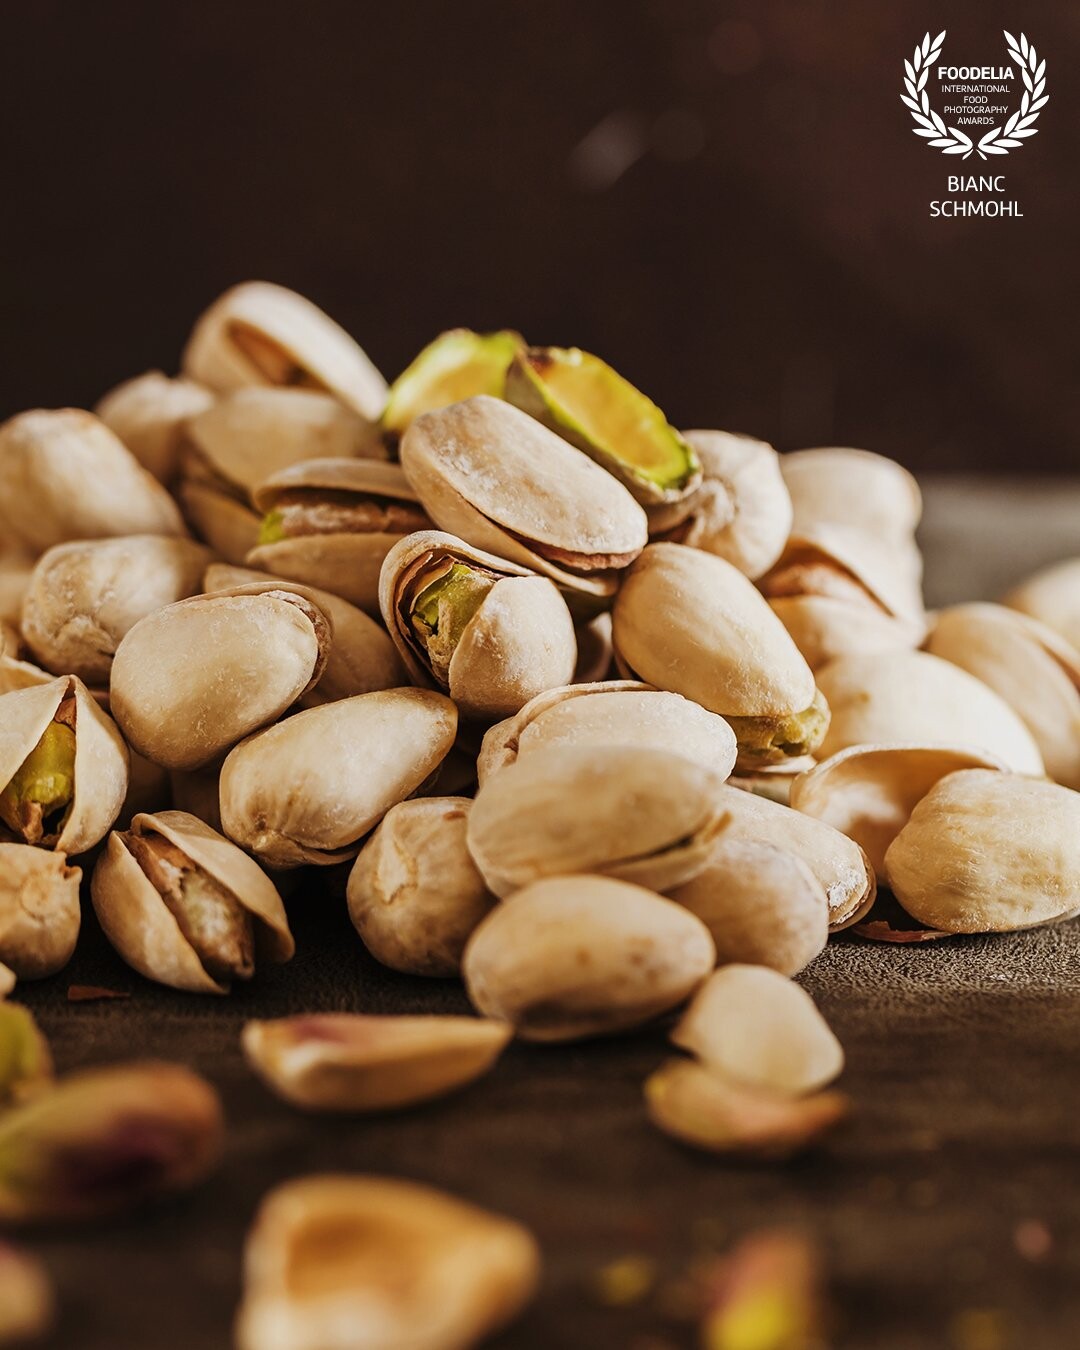 Close up photography and food can be a difficult match, depending on the kind of dish and of course multiple other factors. Pistachios are a nice example of how food close ups can work! No nonsense, but great impact.